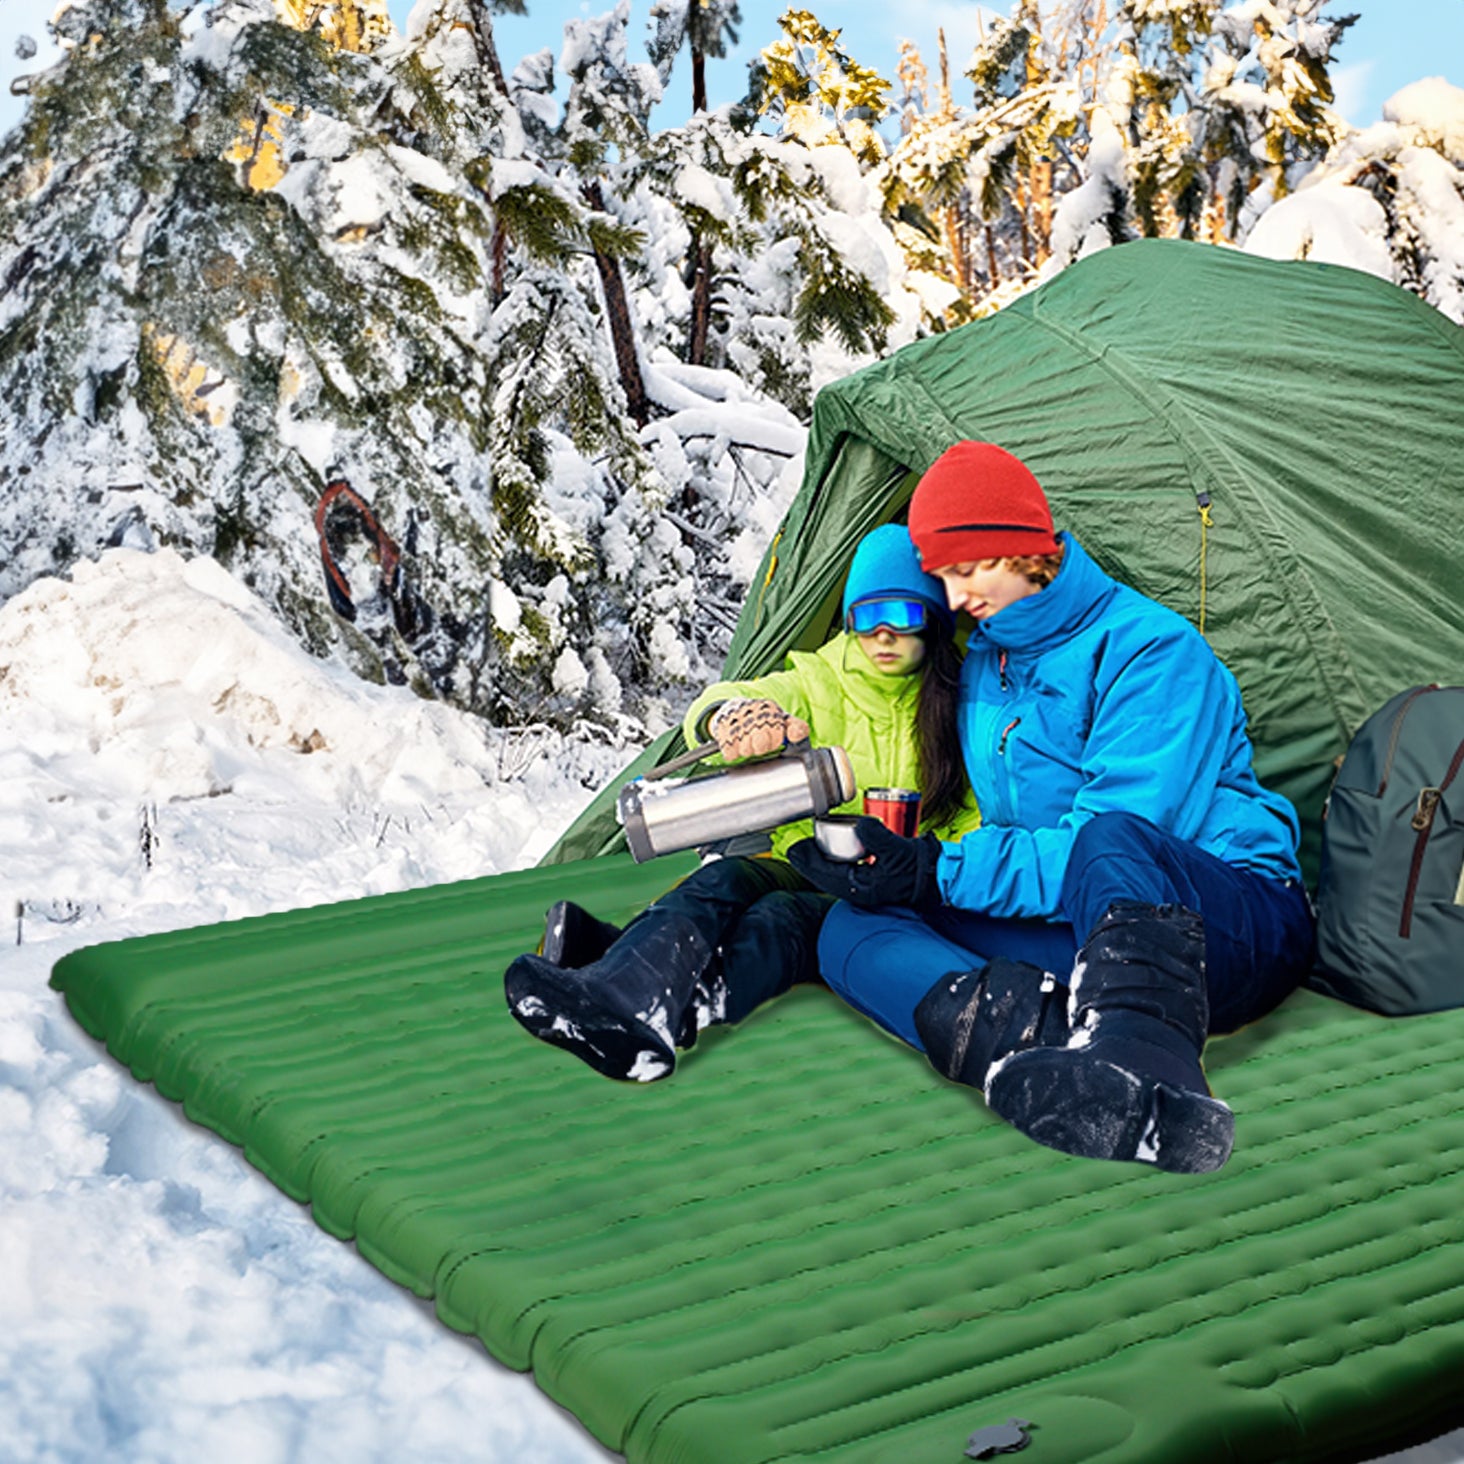  Windrest Double Inflatable Sleeping pad, couple camping, winter